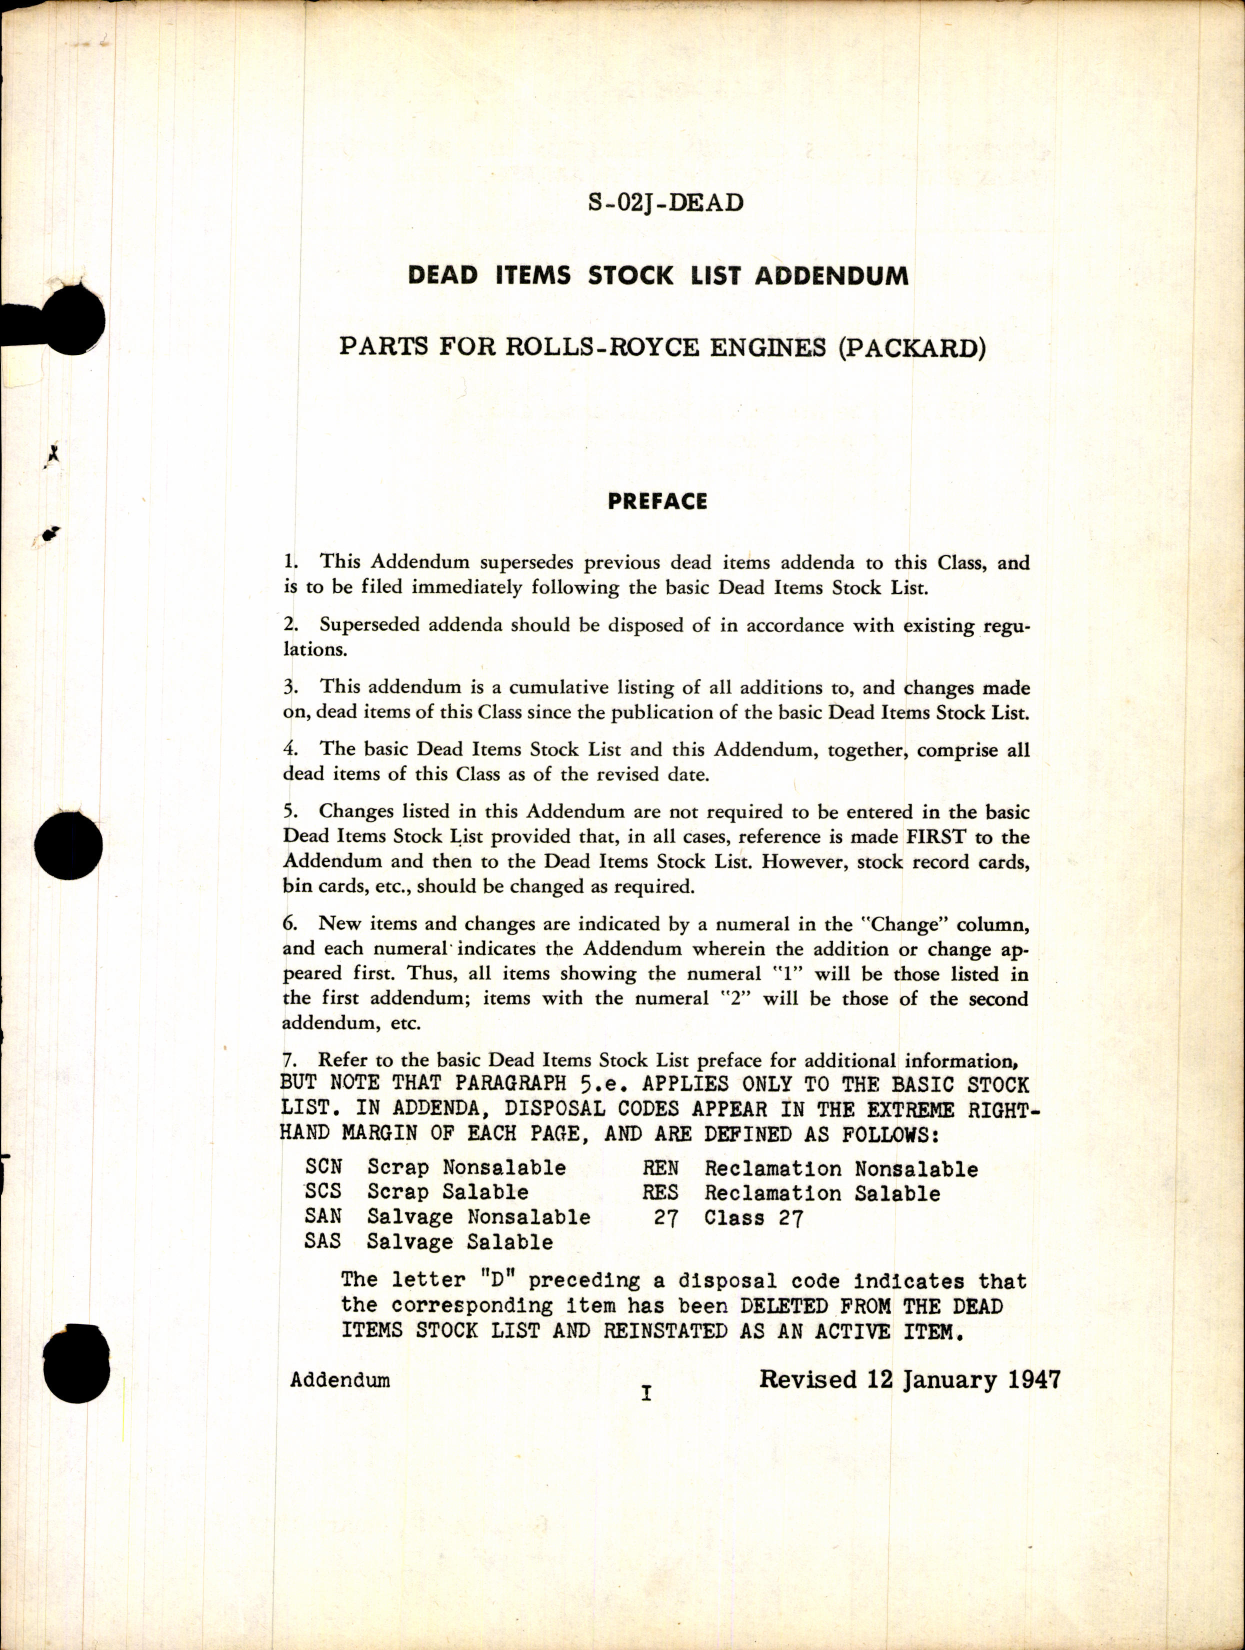 Sample page 3 from AirCorps Library document: Dead Items Stock List Parts For Rolls-Royce Engines (Packard)